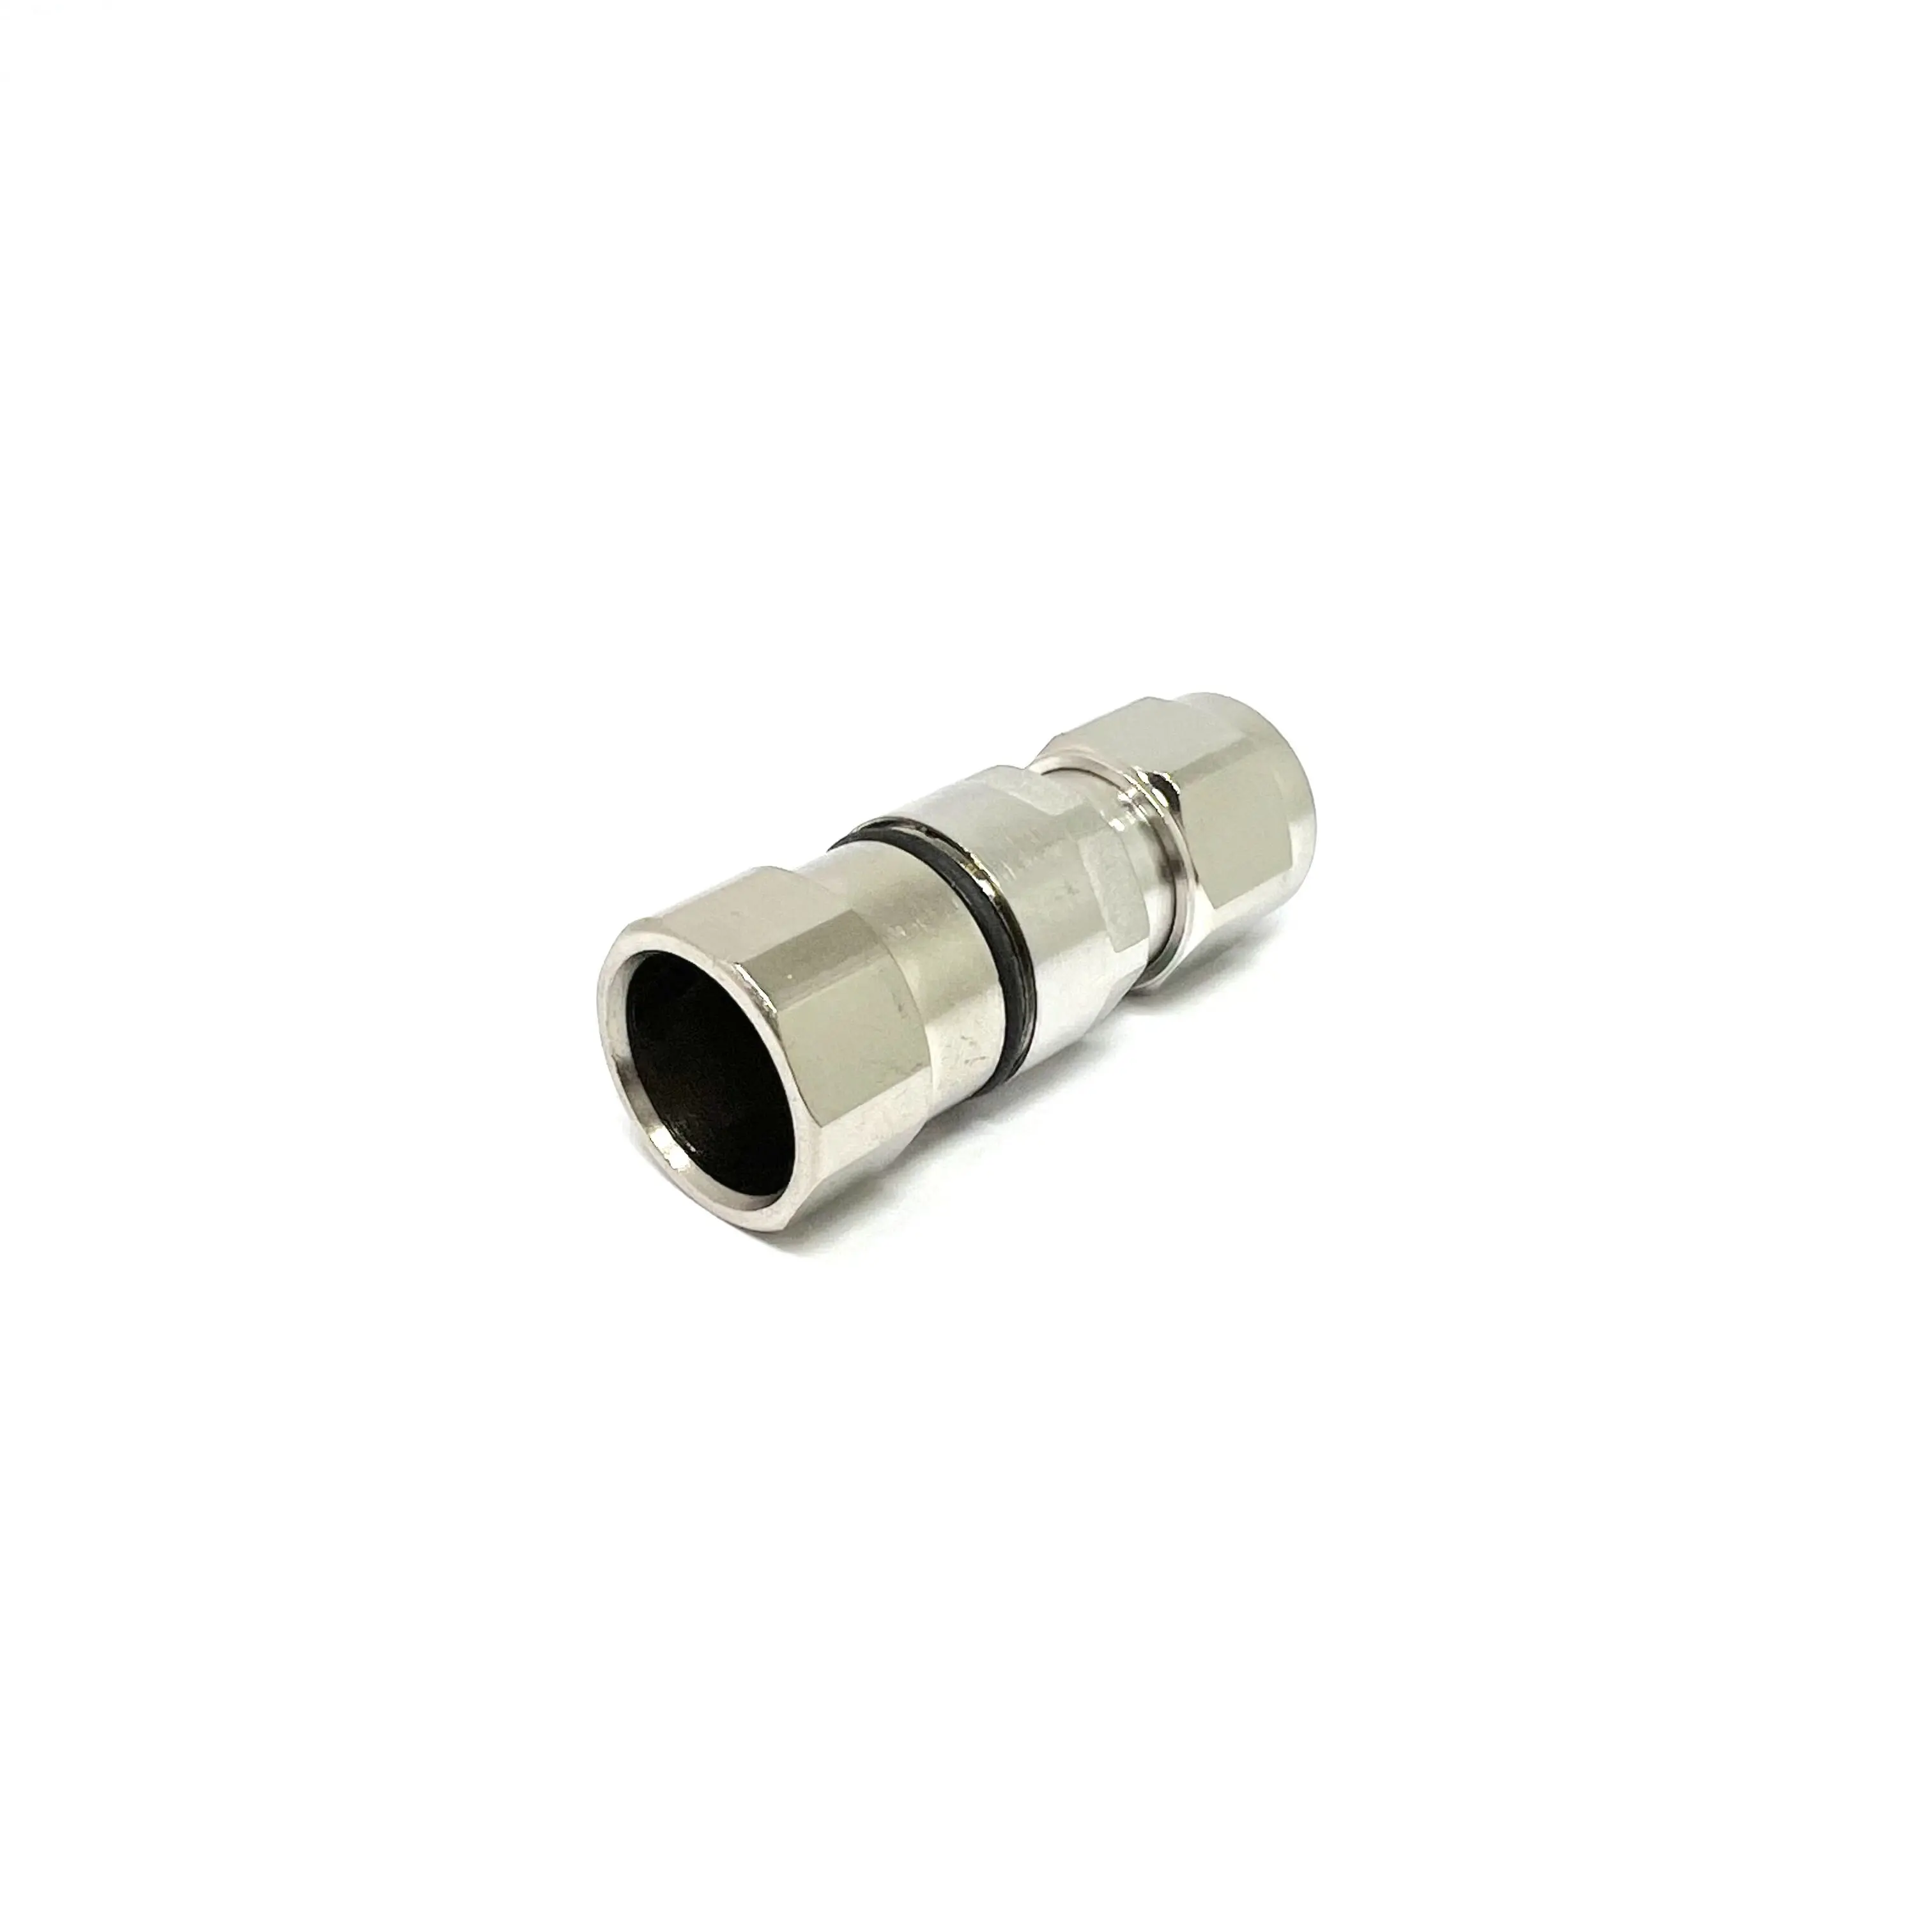 rf plate with Nickel coaxial connector n type male plug clamp for 1/2 feeder coaxial cable factory